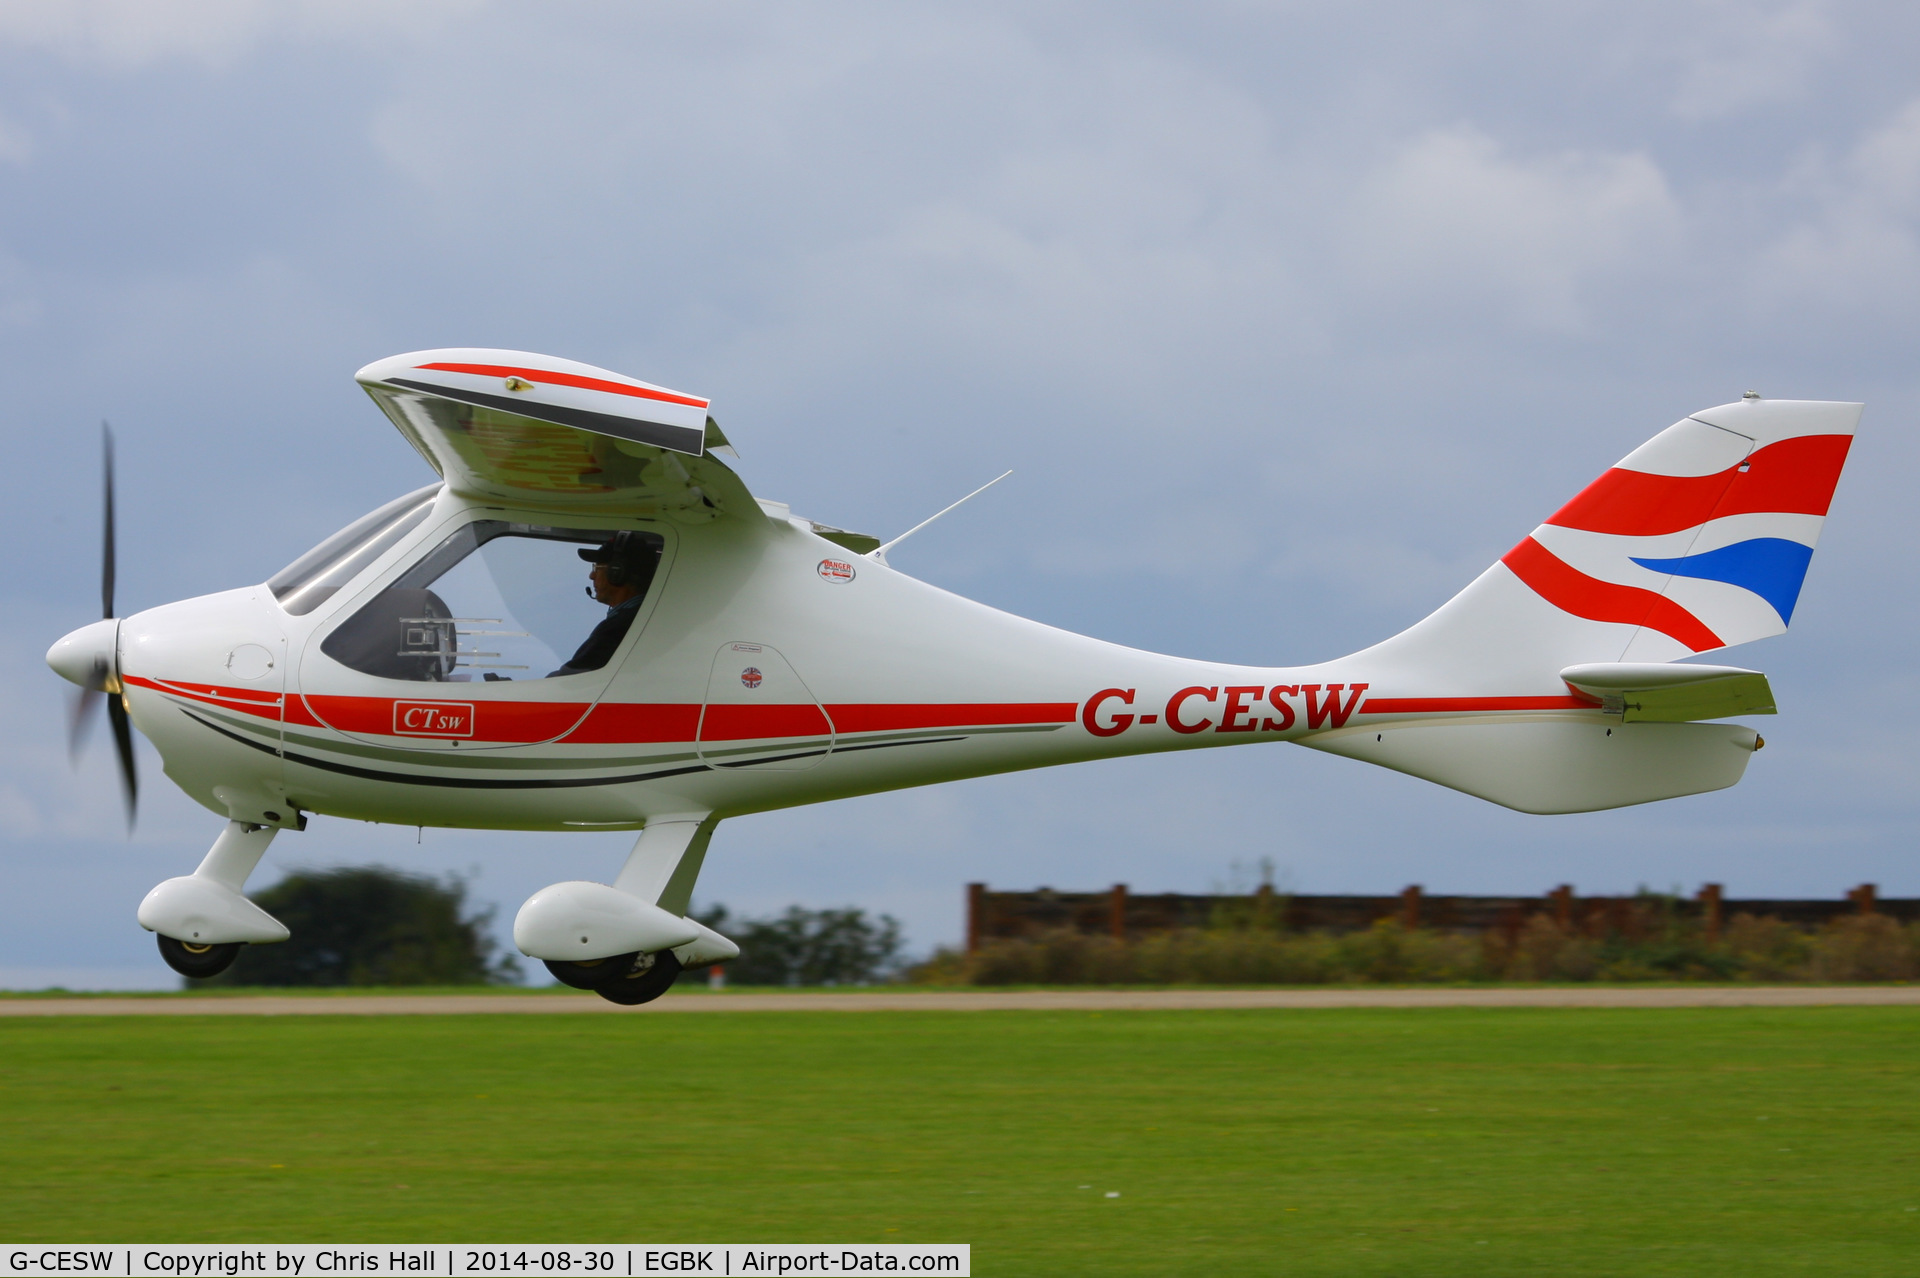 G-CESW, 2007 Flight Design CTSW C/N 8296, at the LAA Rally 2014, Sywell